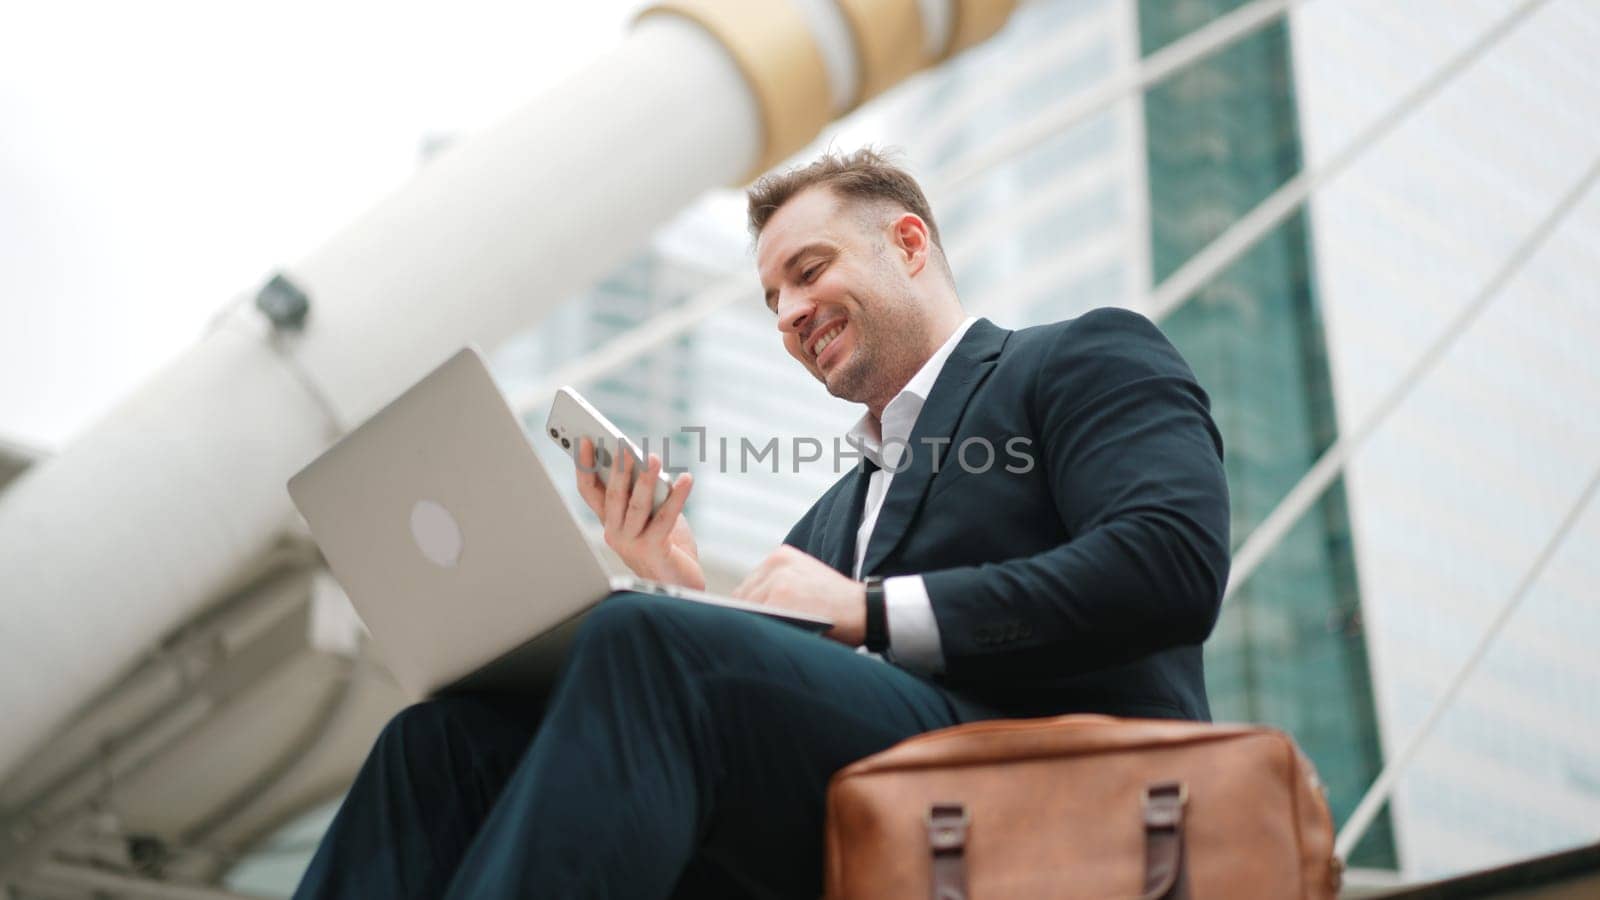 Caucasian business man sitting at stairs while using laptop and phone. Urbane. by biancoblue